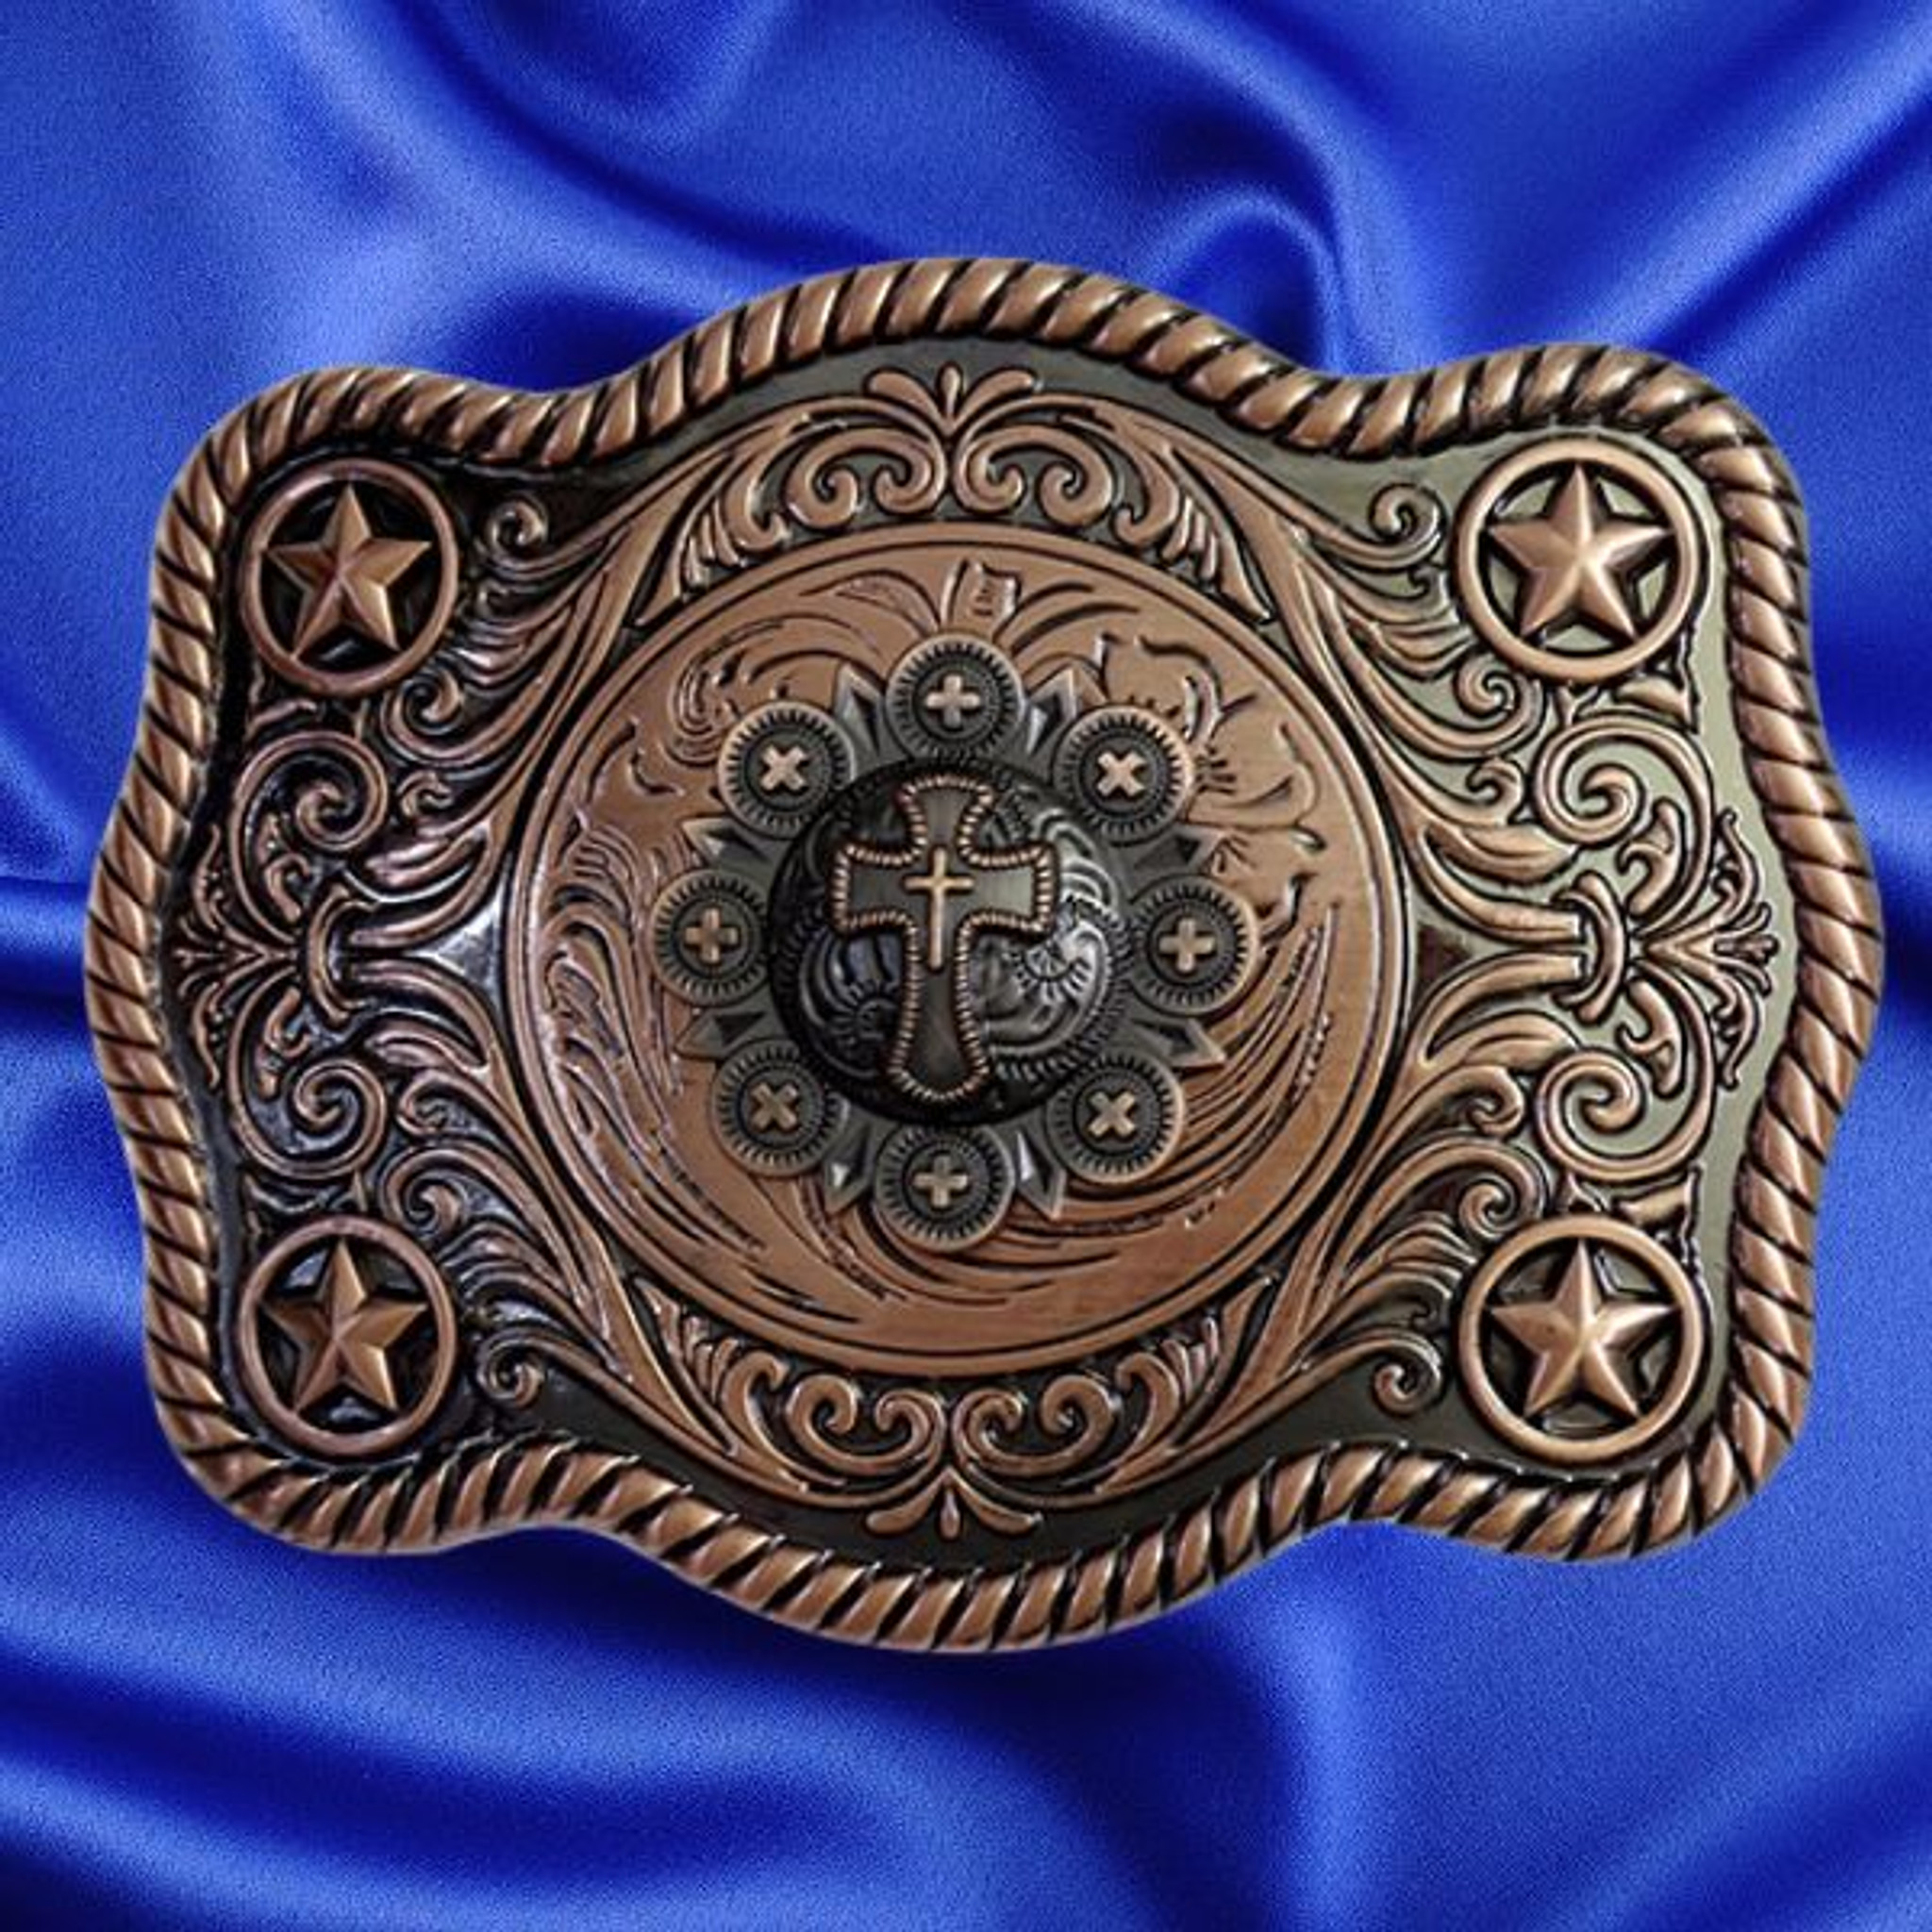 Product Types: Belt Buckles